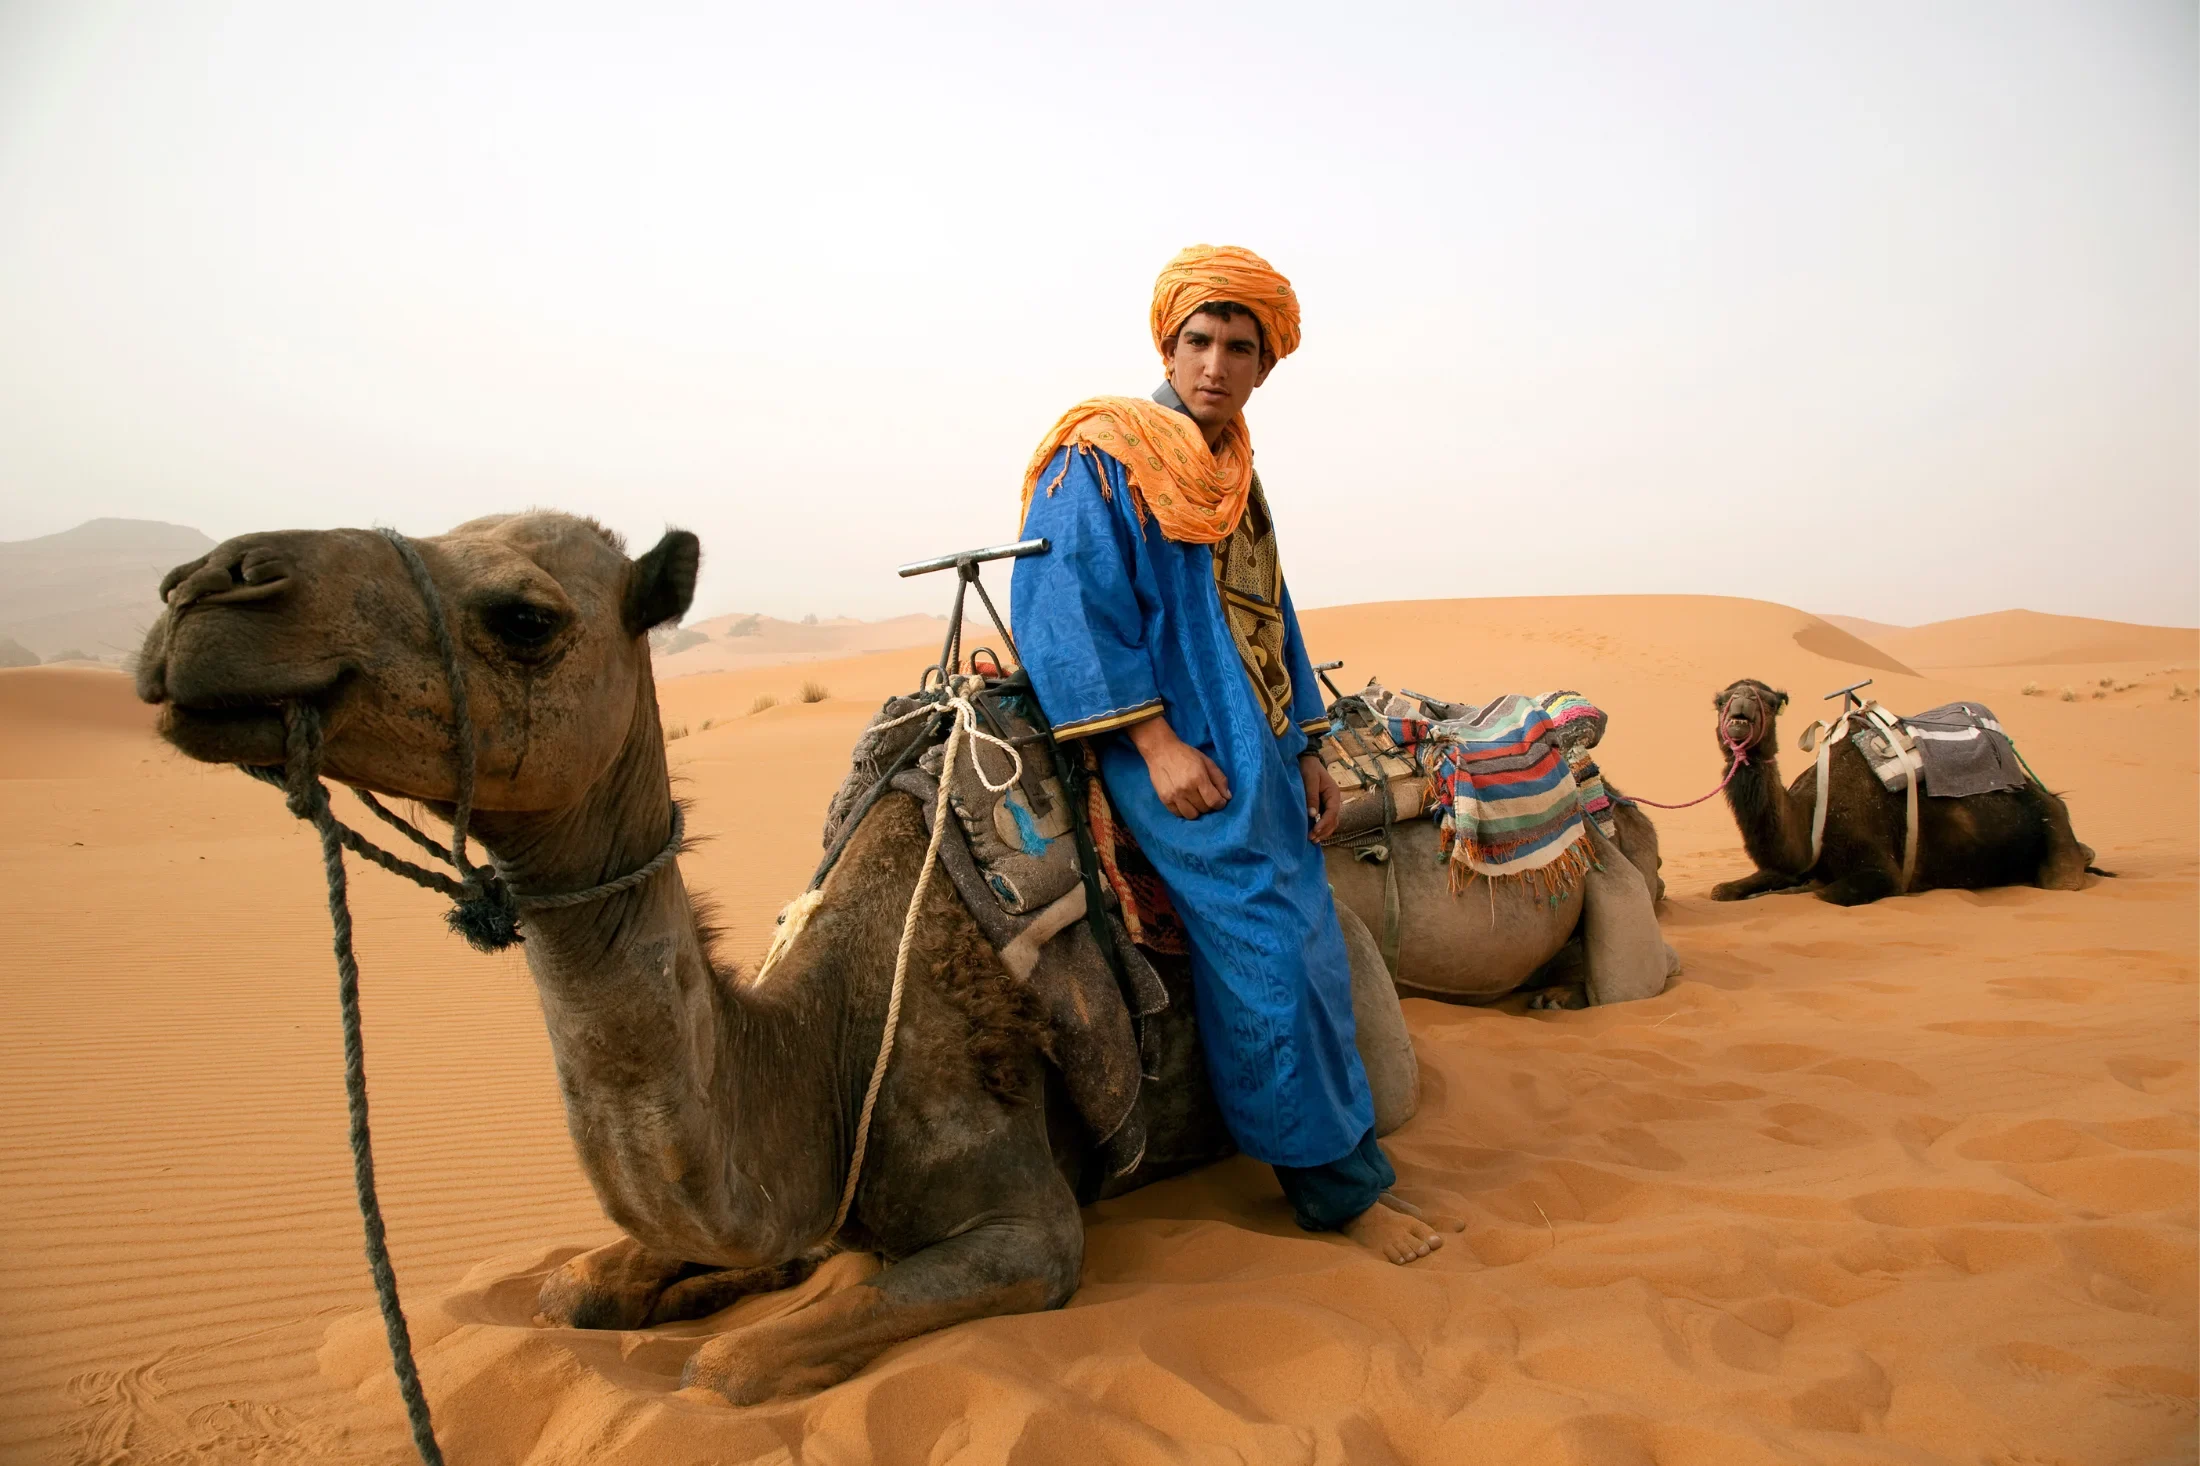 Bedouin and Camels in Sahara Desert, Morocco